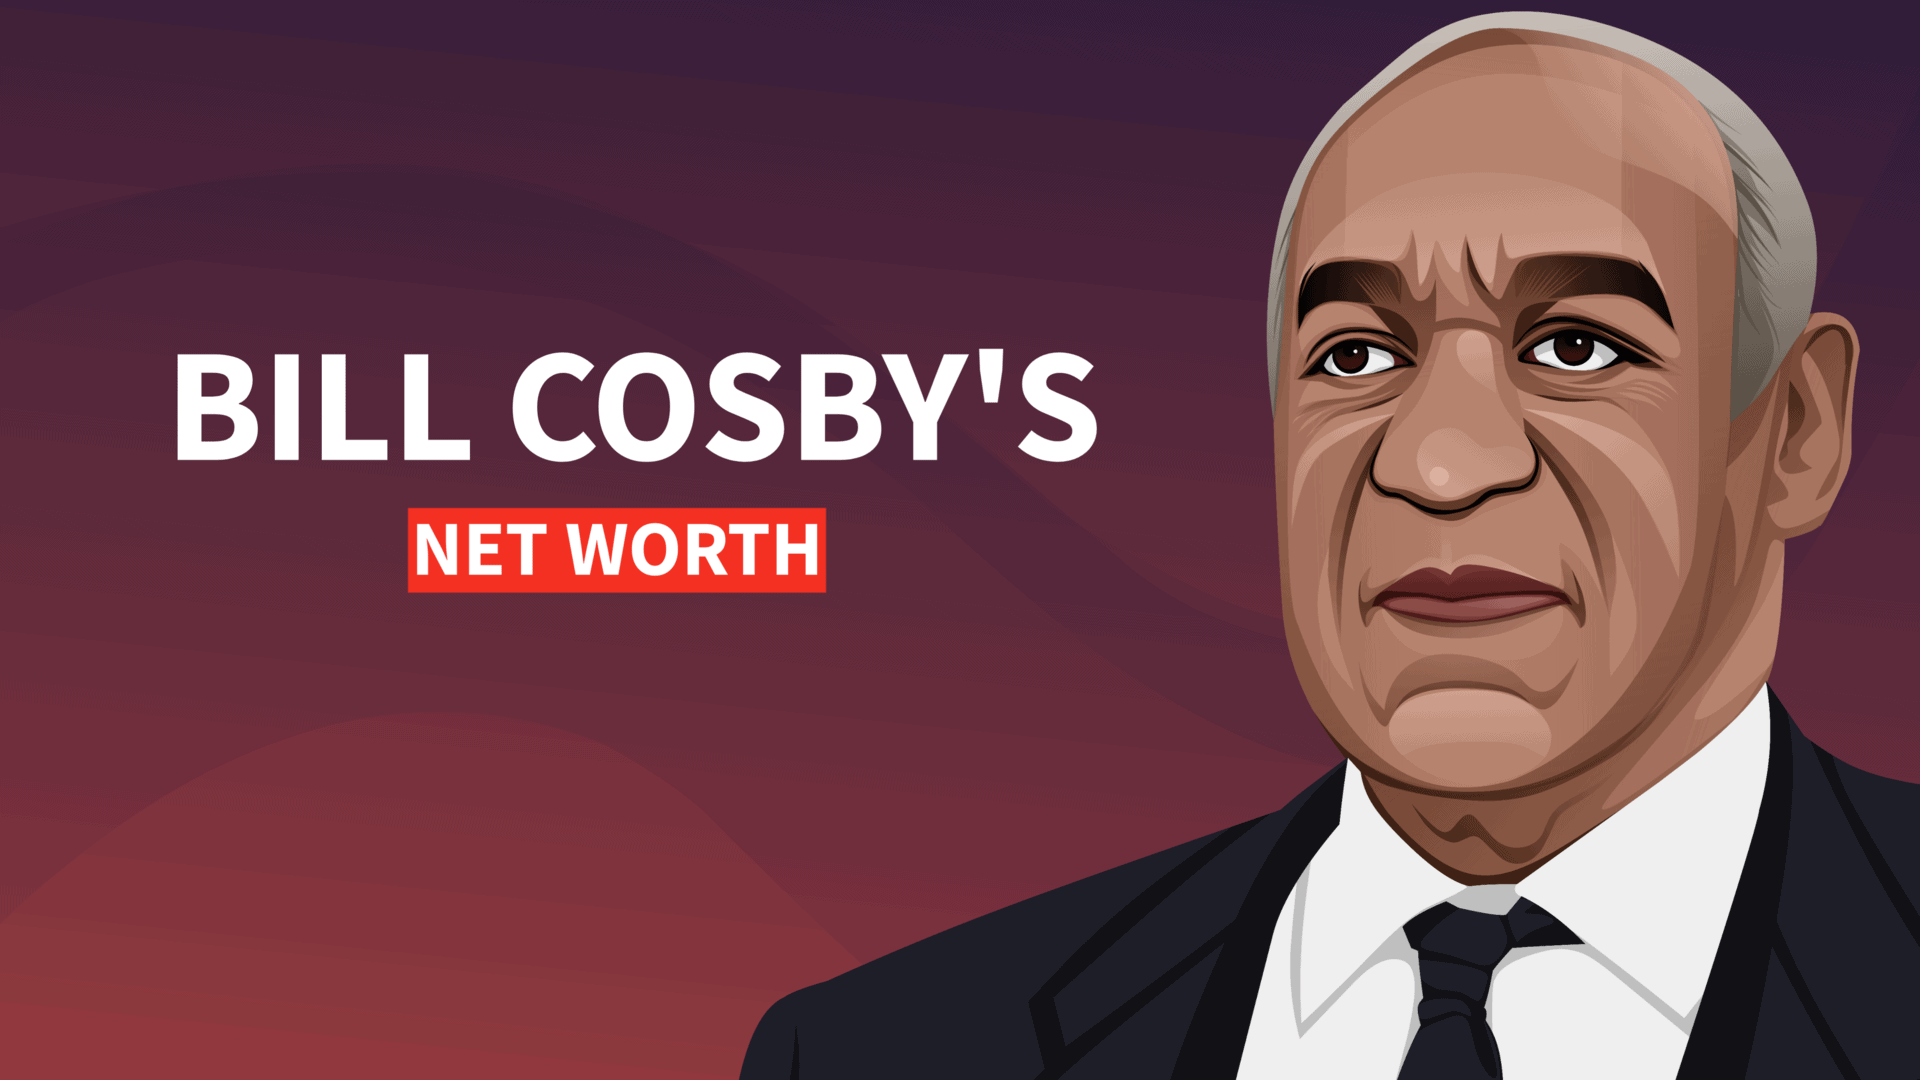 Bill Cosby's Net Worth and Story